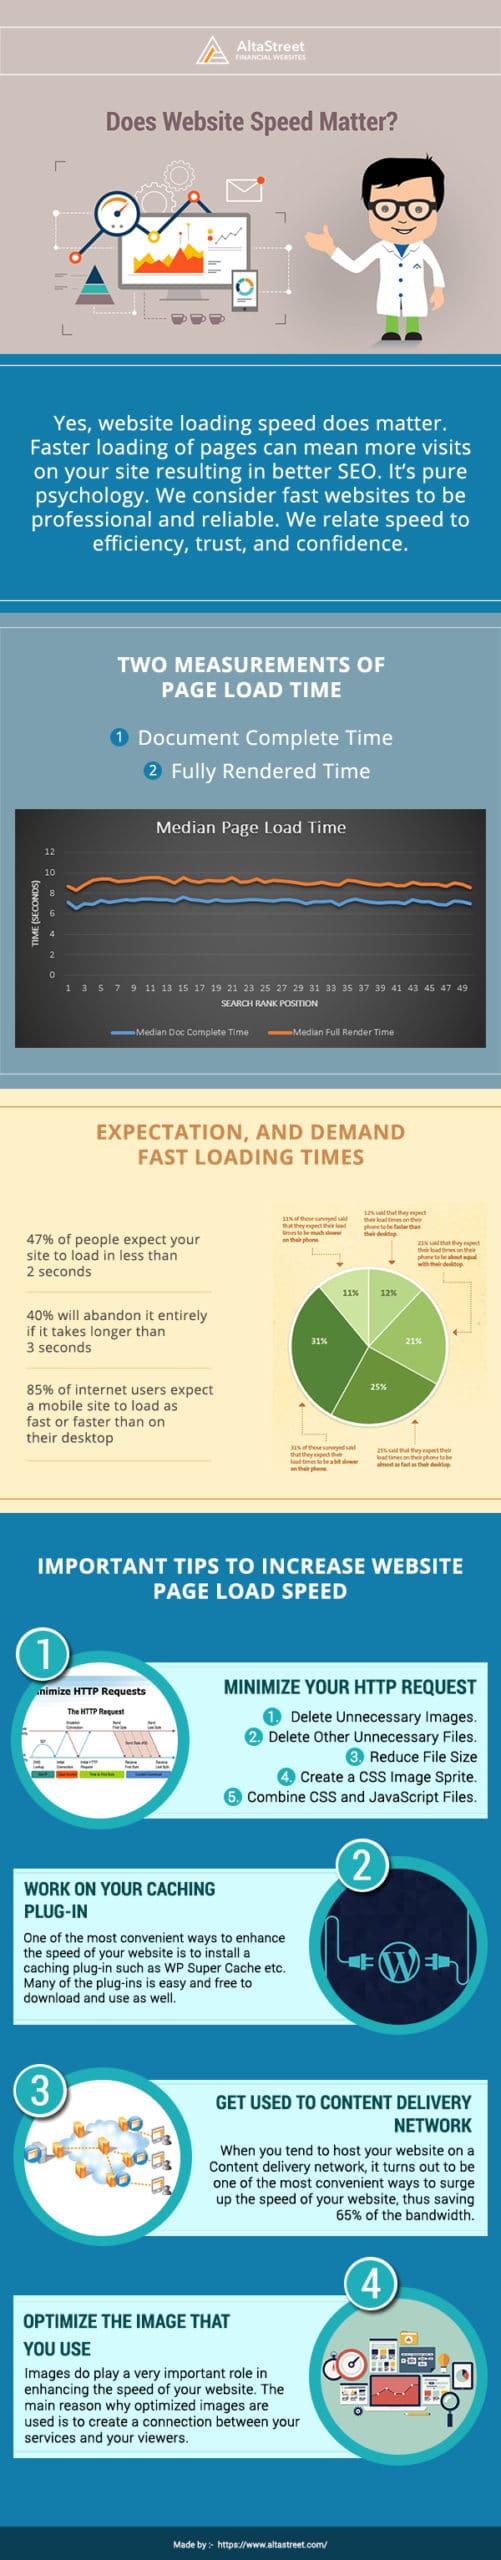 why website speed matter infographic